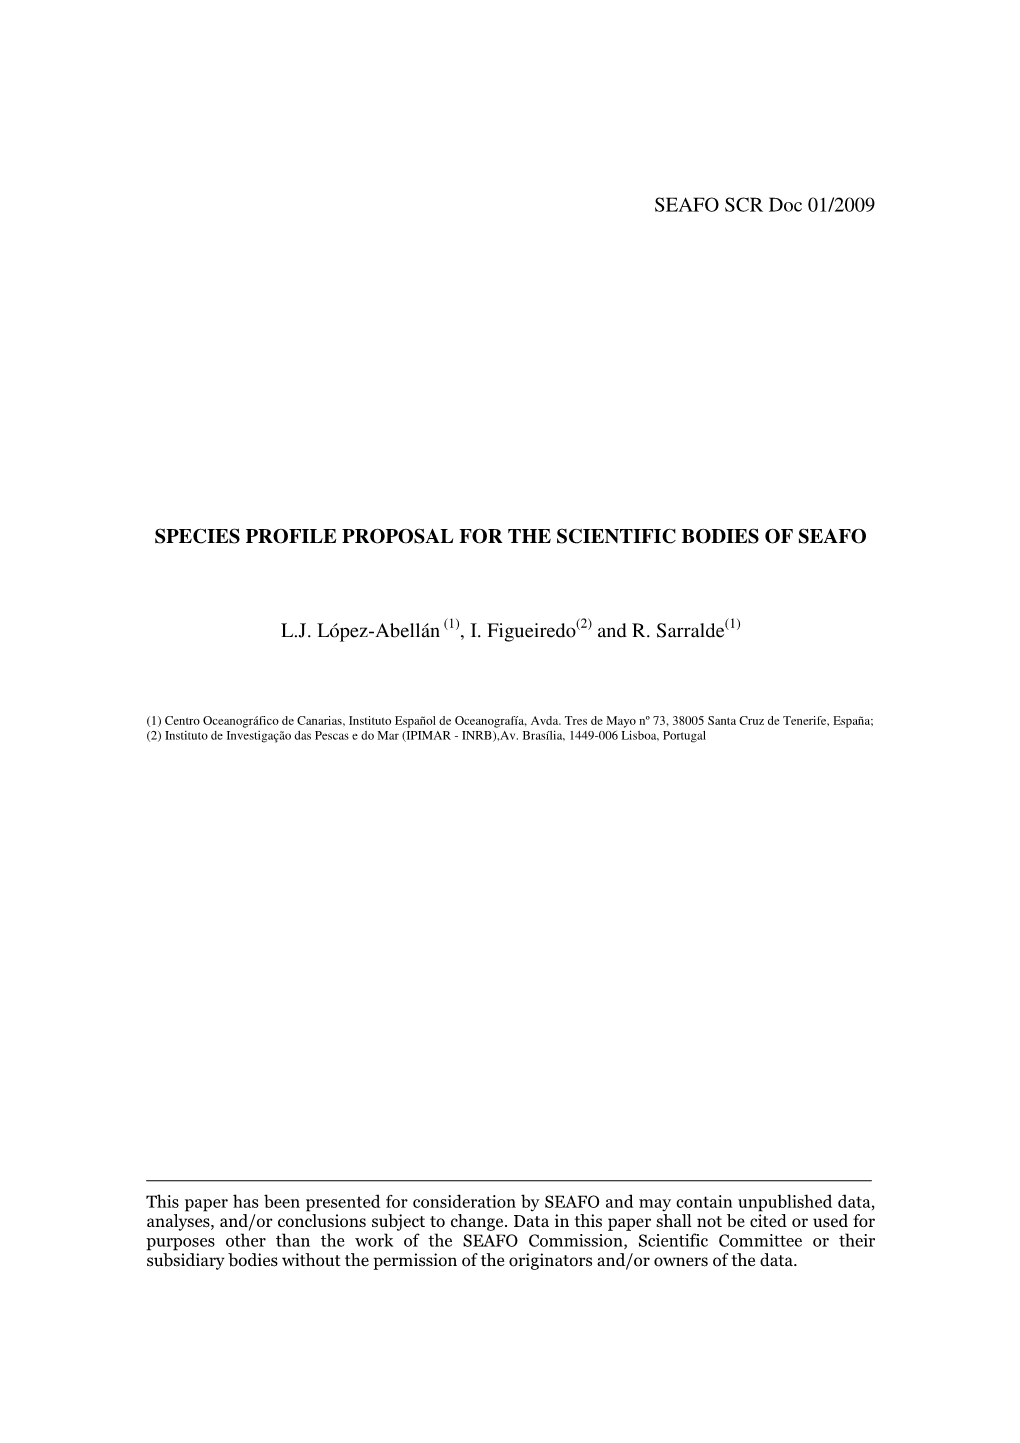 SEAFO SCR Doc 01/2009 SPECIES PROFILE PROPOSAL for THE